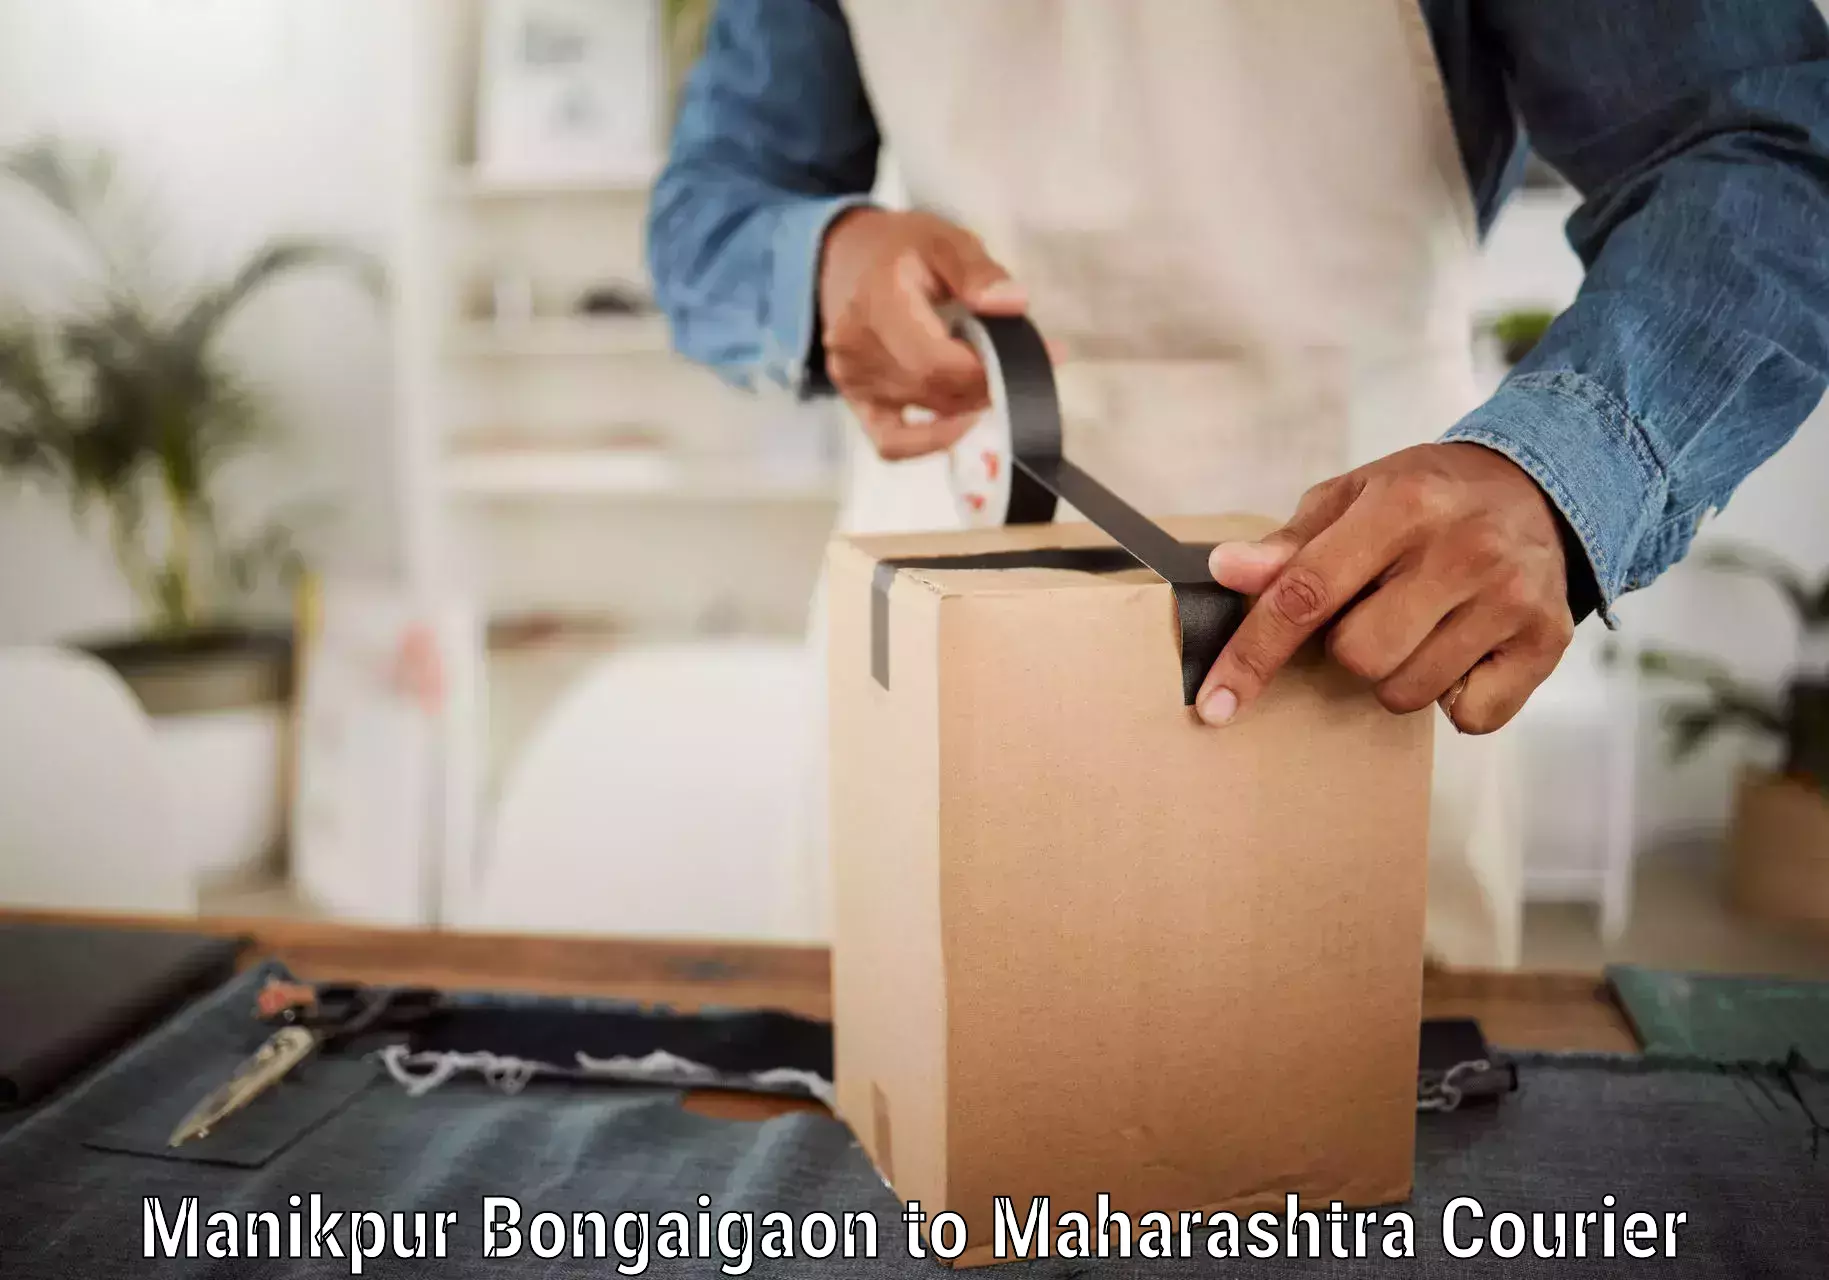 End-to-end delivery Manikpur Bongaigaon to Pen Raigad